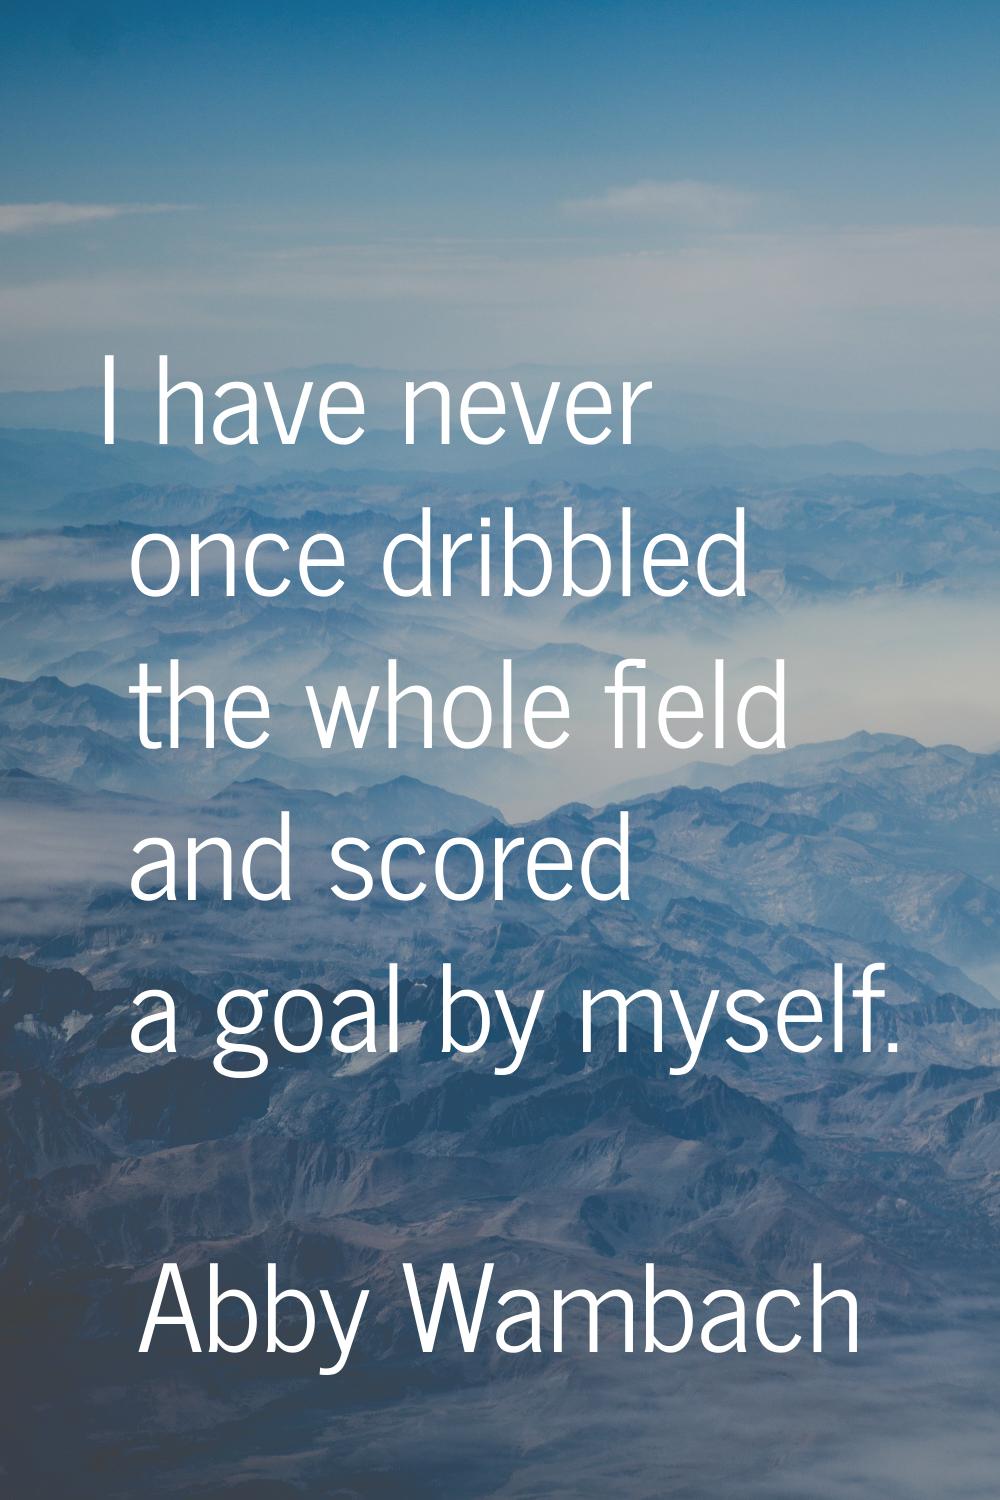 I have never once dribbled the whole field and scored a goal by myself.